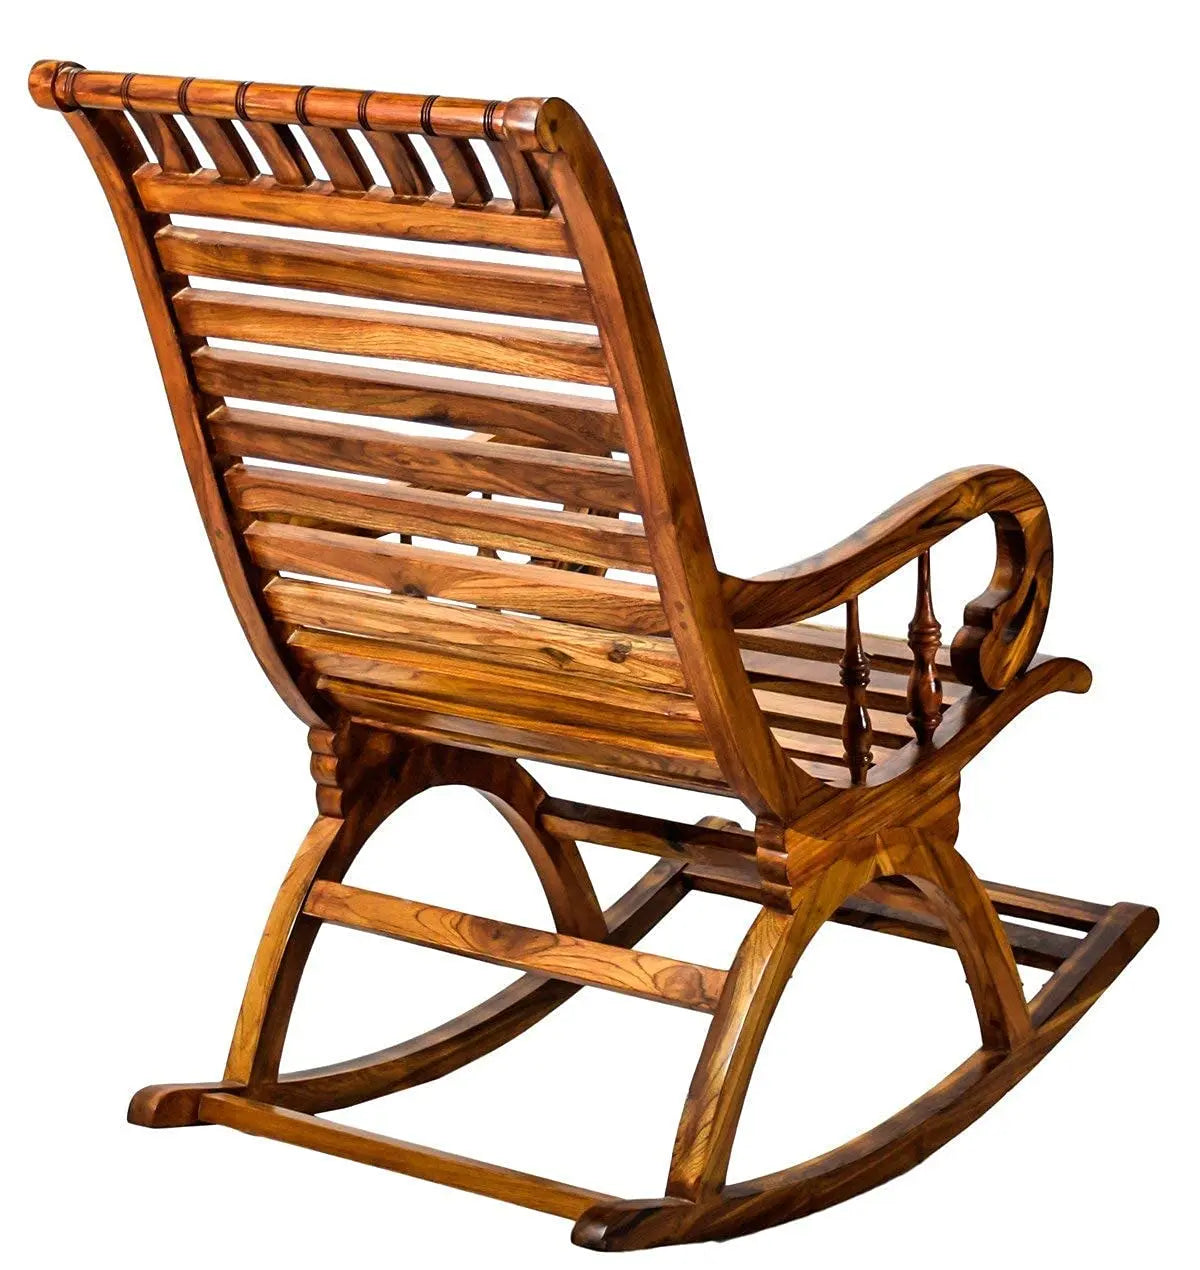 Rocking chair Hawk- Handmade Wooden Rocking Chair, Relax Chair with Back Support for Adults | Mid-Century Rocking Chair Comfortable and Simple Designed Rocking Chair Furneez